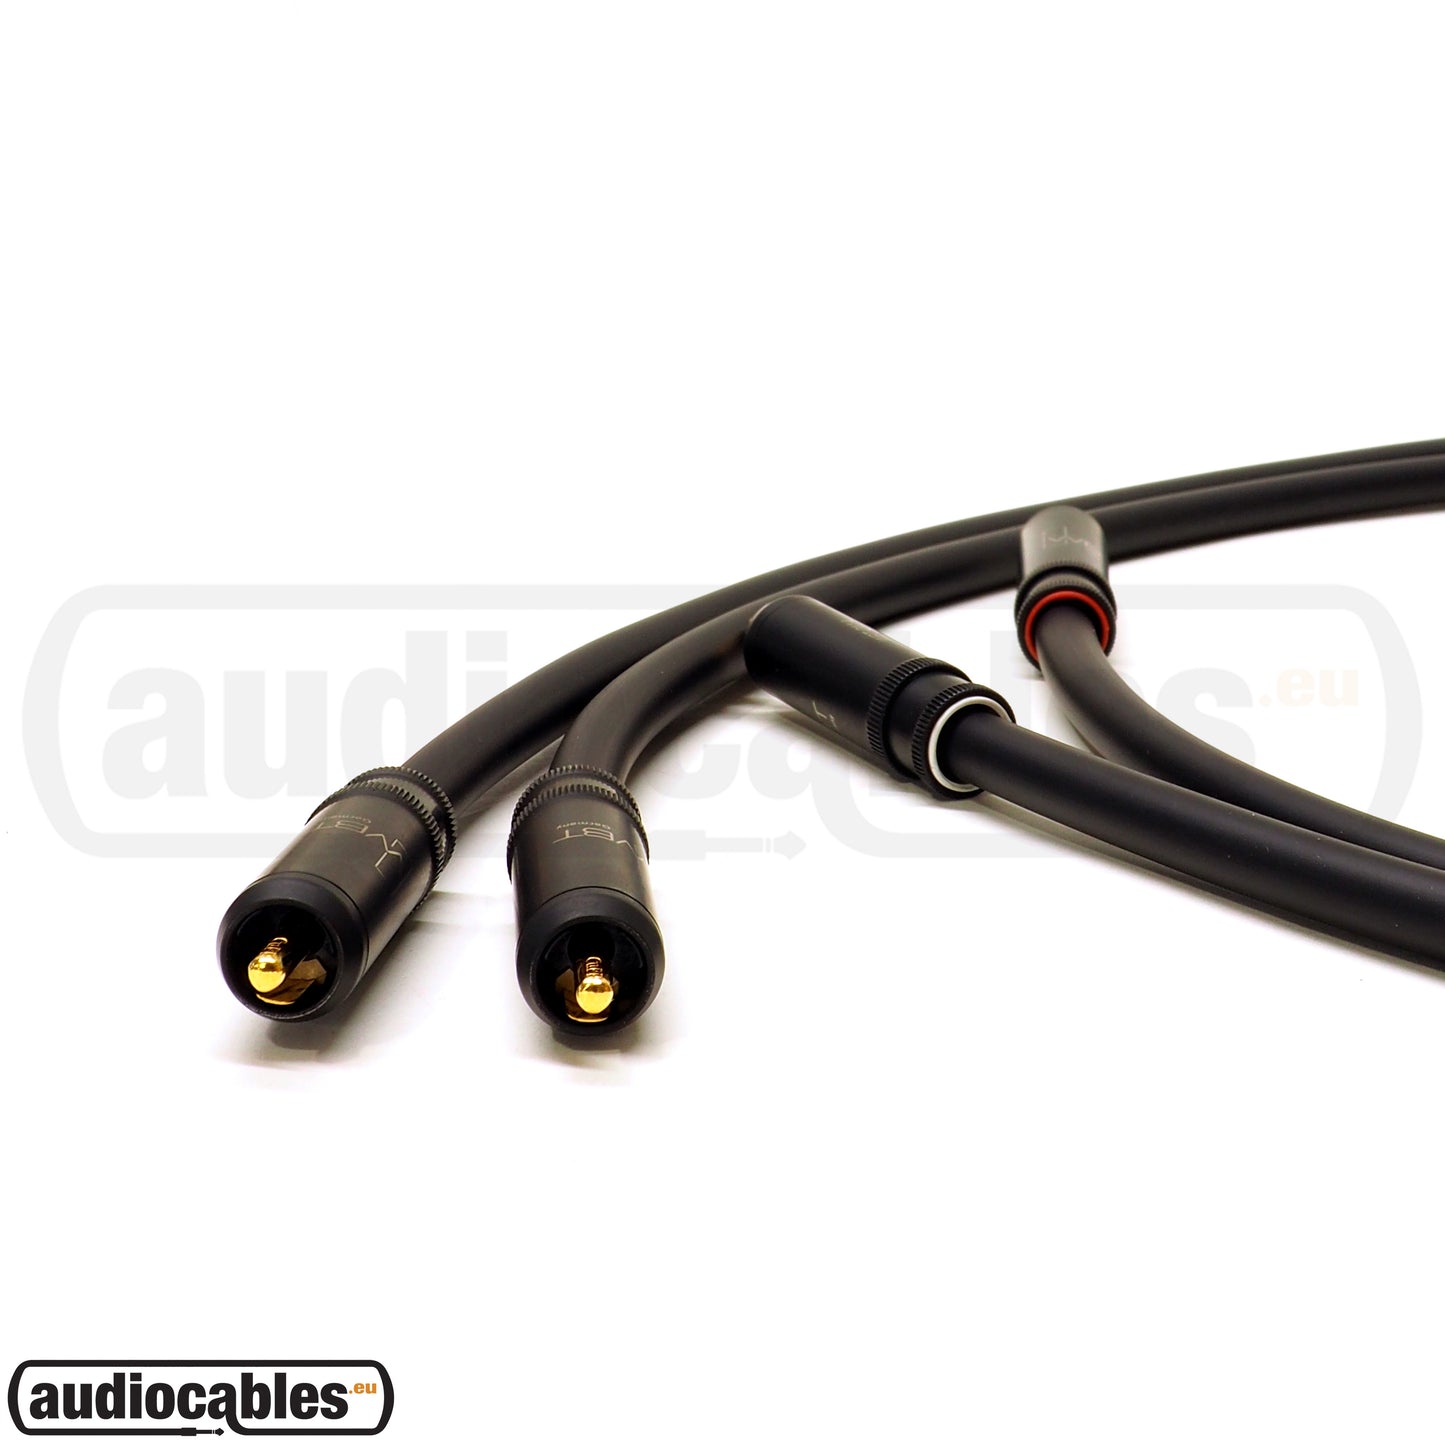 Mogami 2497 RCA Stereo Pair Cable w/ WBT Connectors